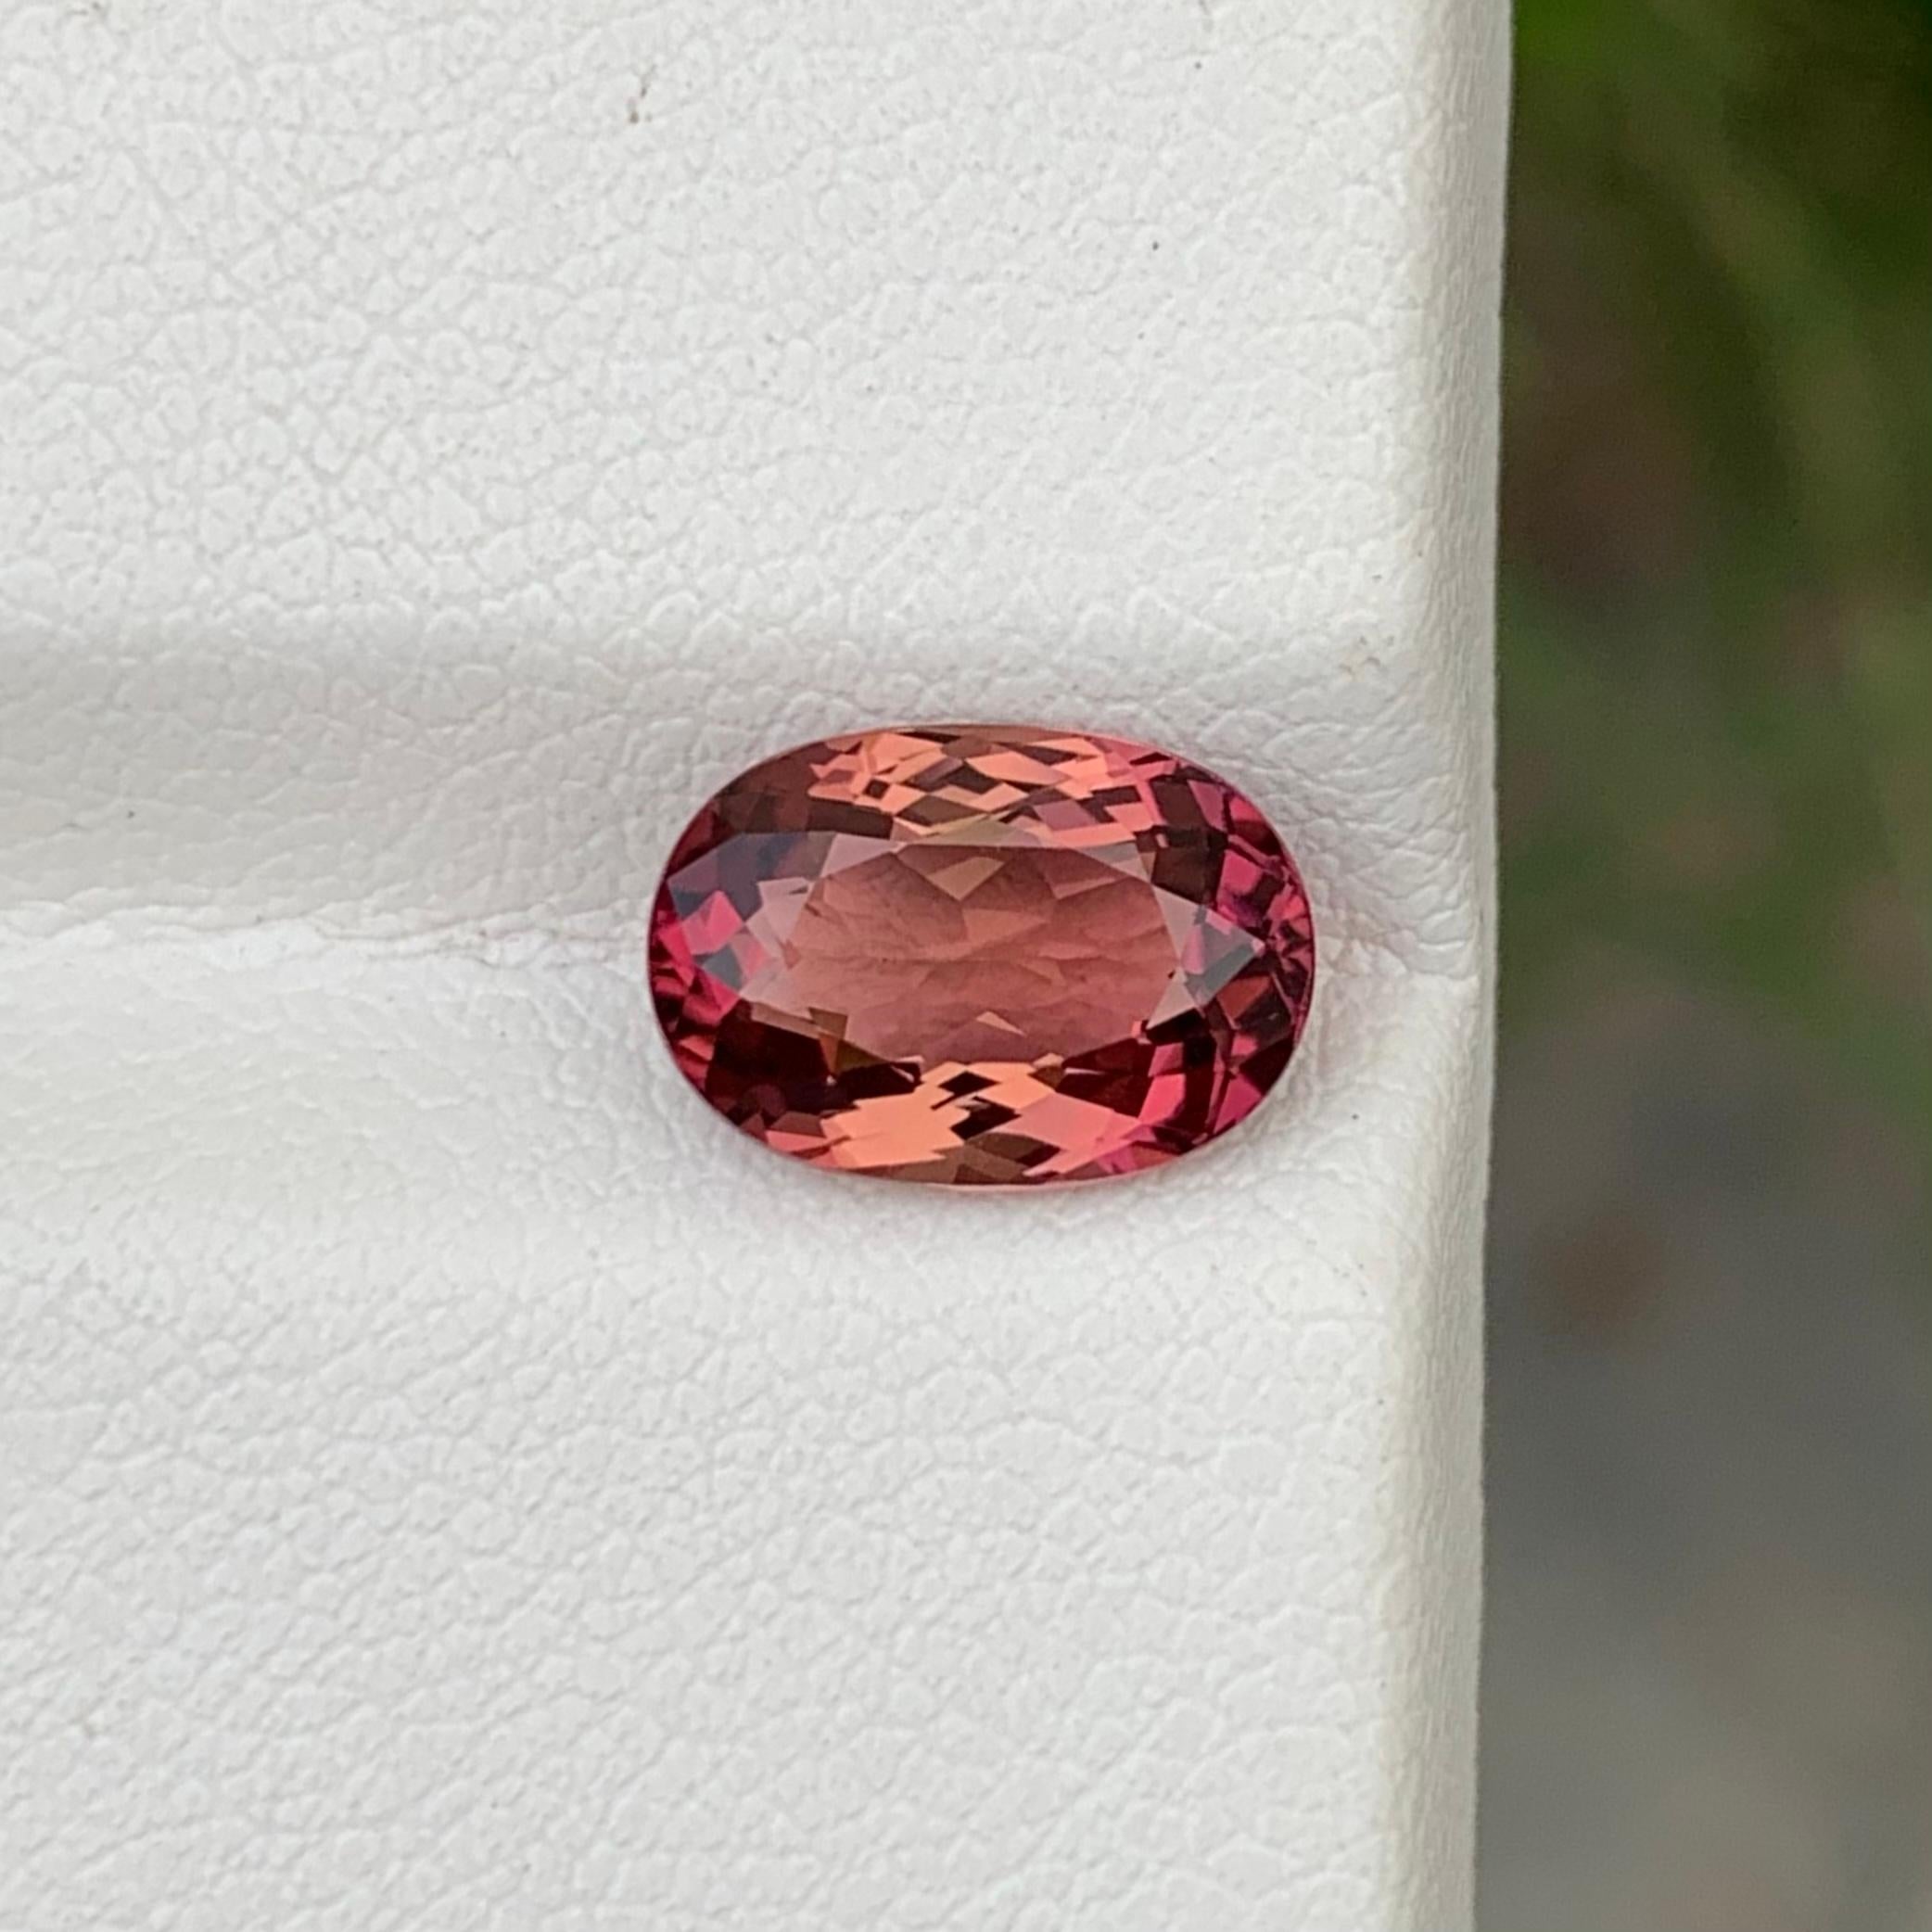 Faceted Tourmaline 
Weight: 2.35 Carats 
Dimension: 9.9x6.9x4.8 Mm
Origin: Congo African 
Shape: Oval 
Color: Pink
Certificate: On Customer Demand 
Congo, particularly the Democratic Republic of the Congo (DRC), is a significant source of tourmaline